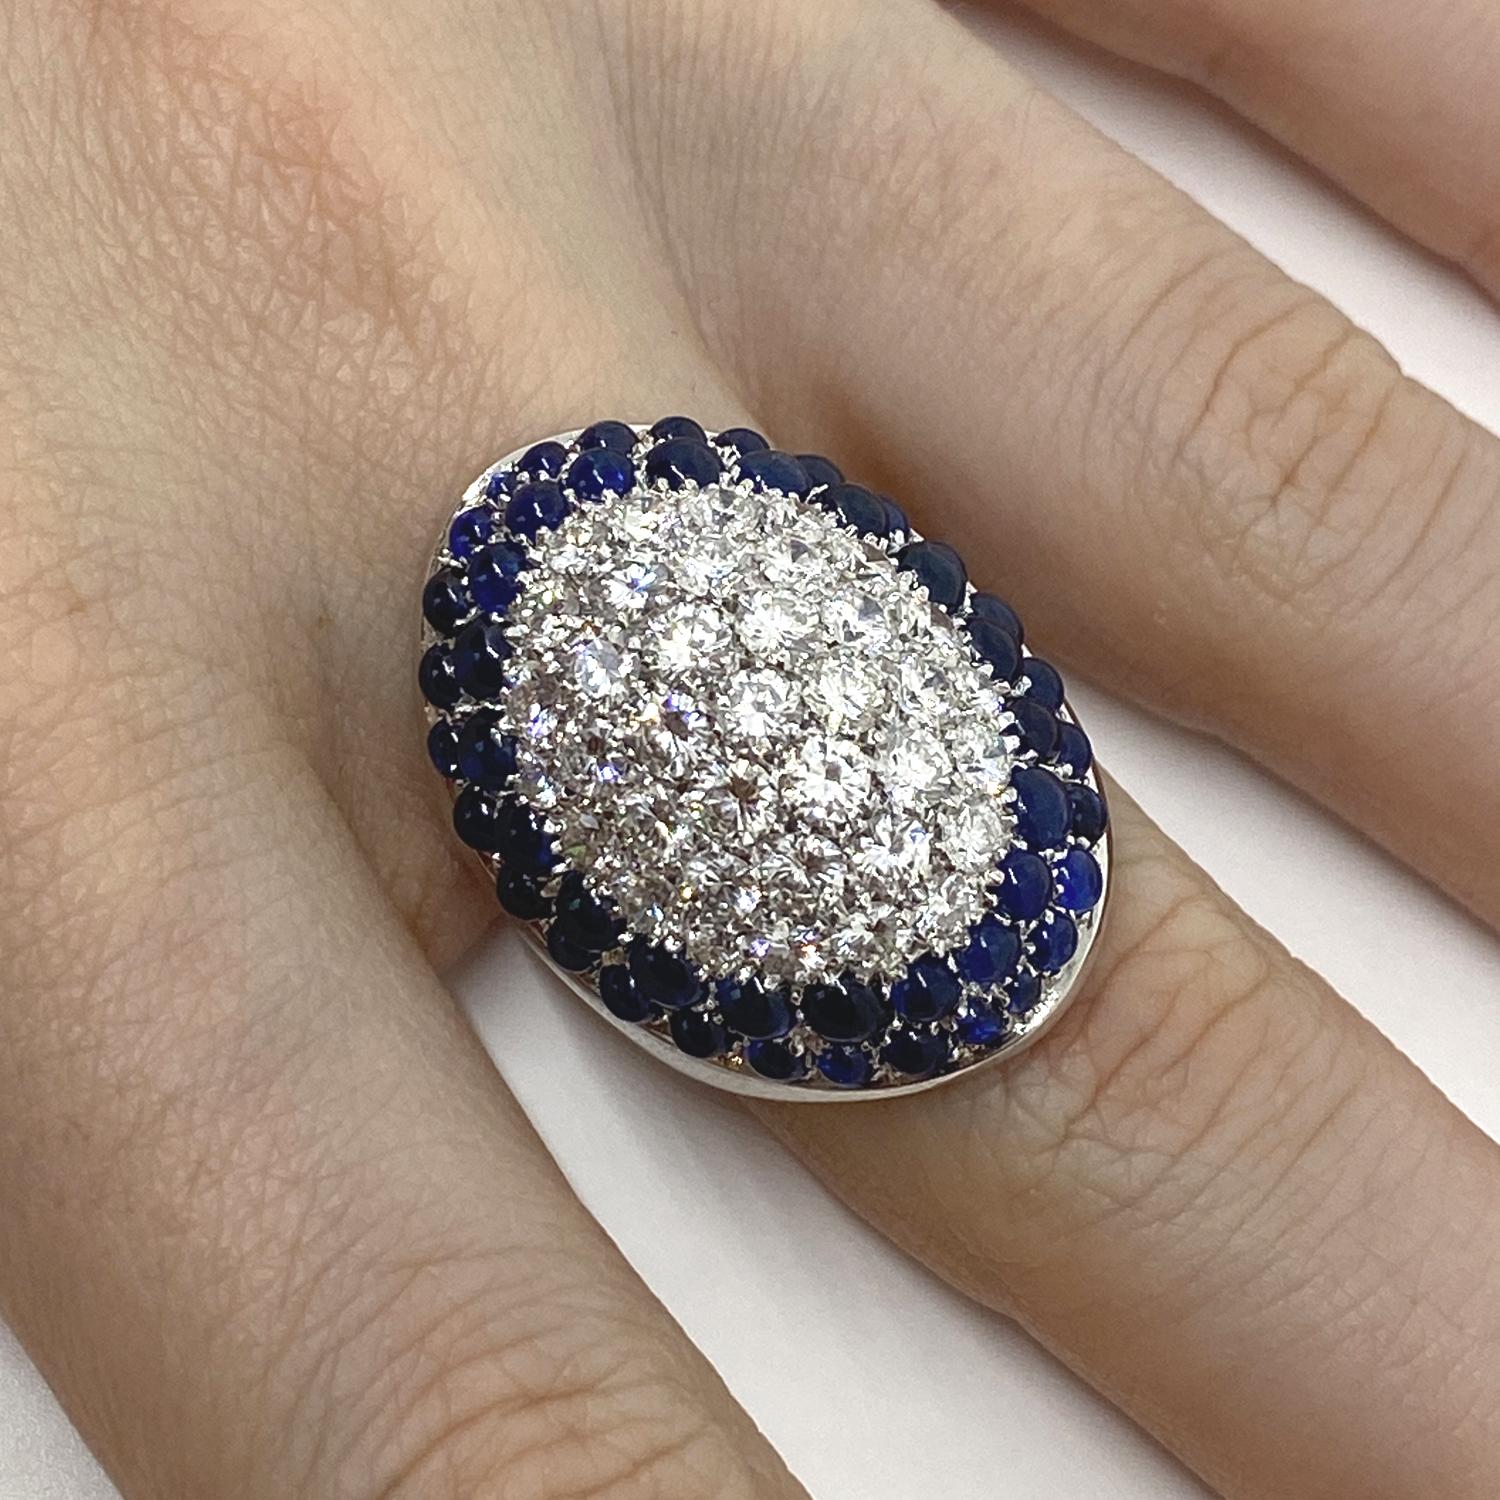 Ring made of 18kt white gold paved with brilliant-cut white natural diamonds for ct.3.97 and Cabochon-cut blue sapphires for ct.6.2

Welcome to our jewelry collection, where every piece tells a story of timeless elegance and unparalleled